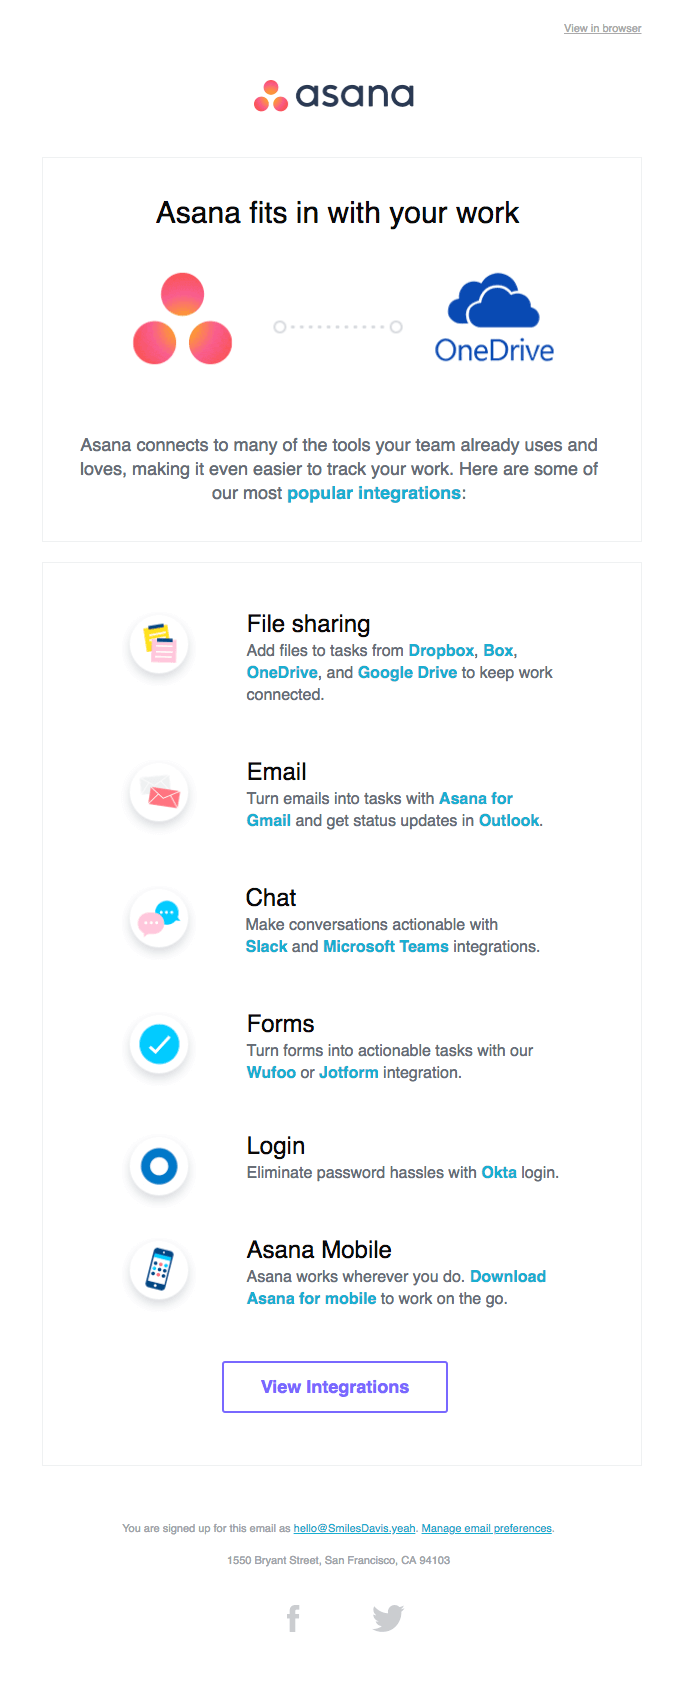 Asana shows users all of the different ways the tool fits in with their work.